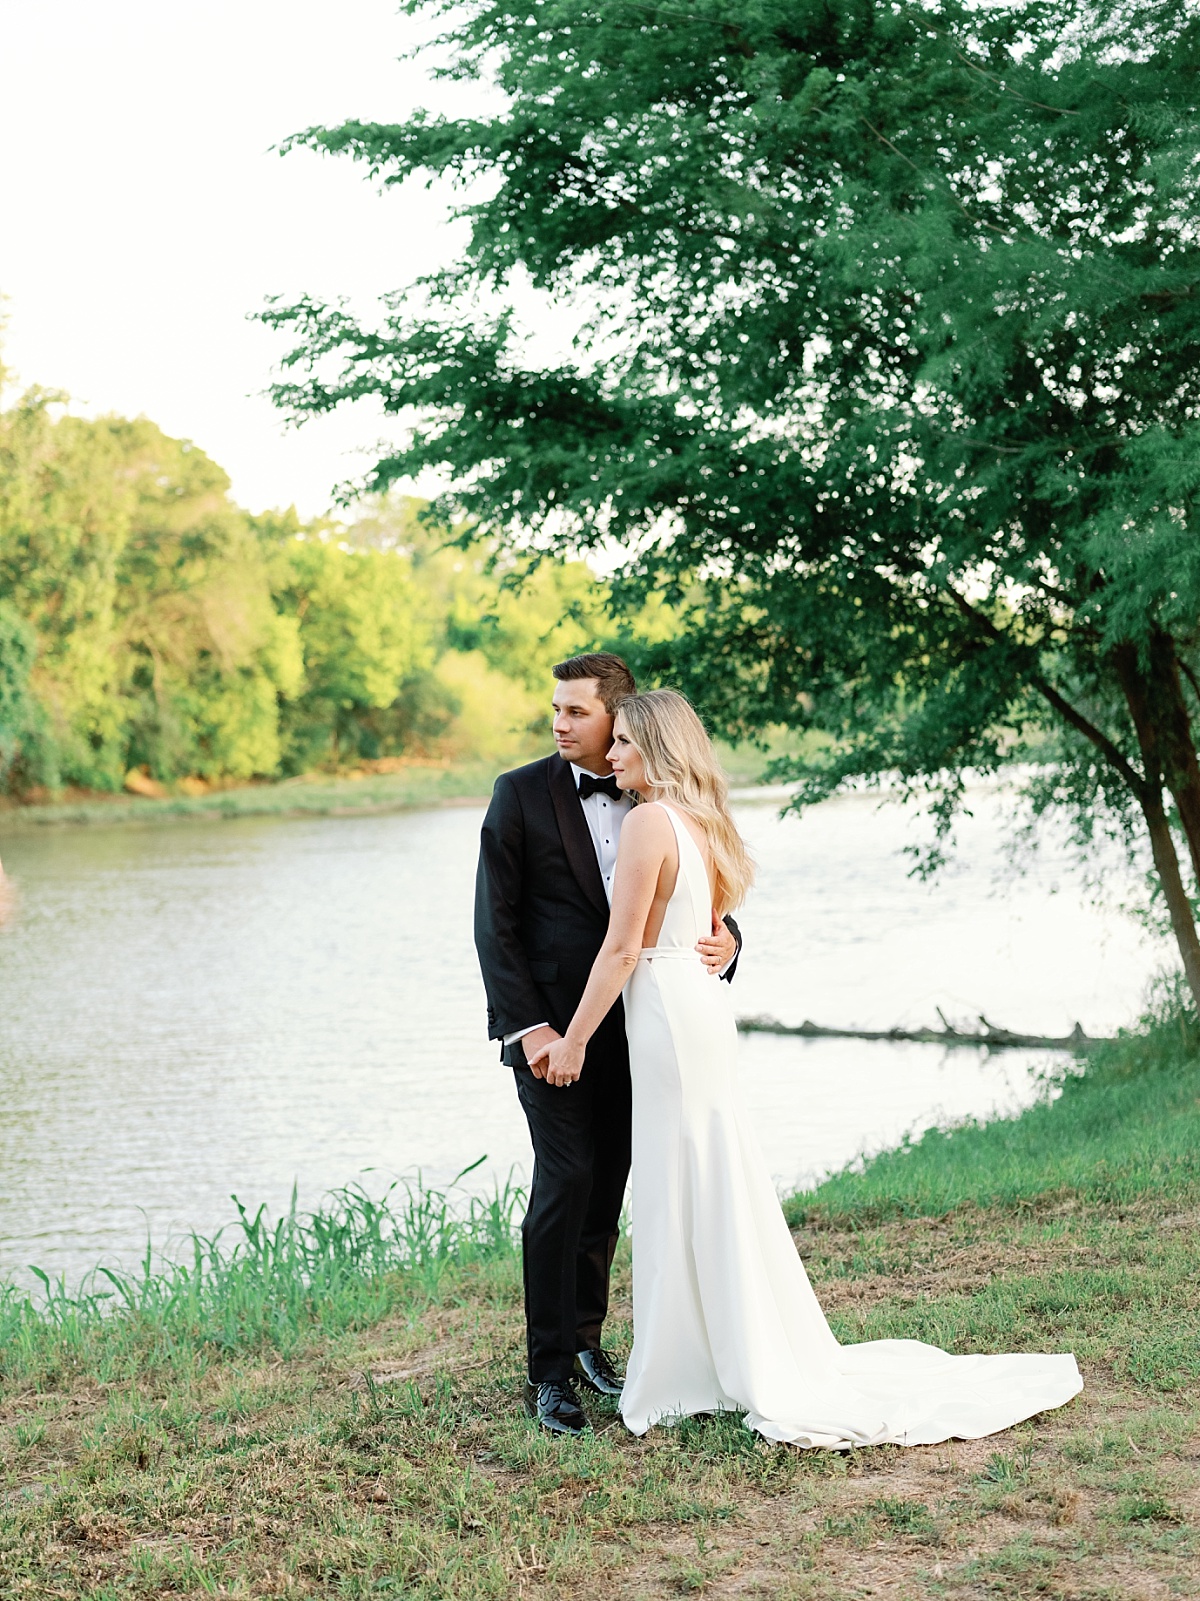 Bride and Groom standing near the river in their wedding attire.